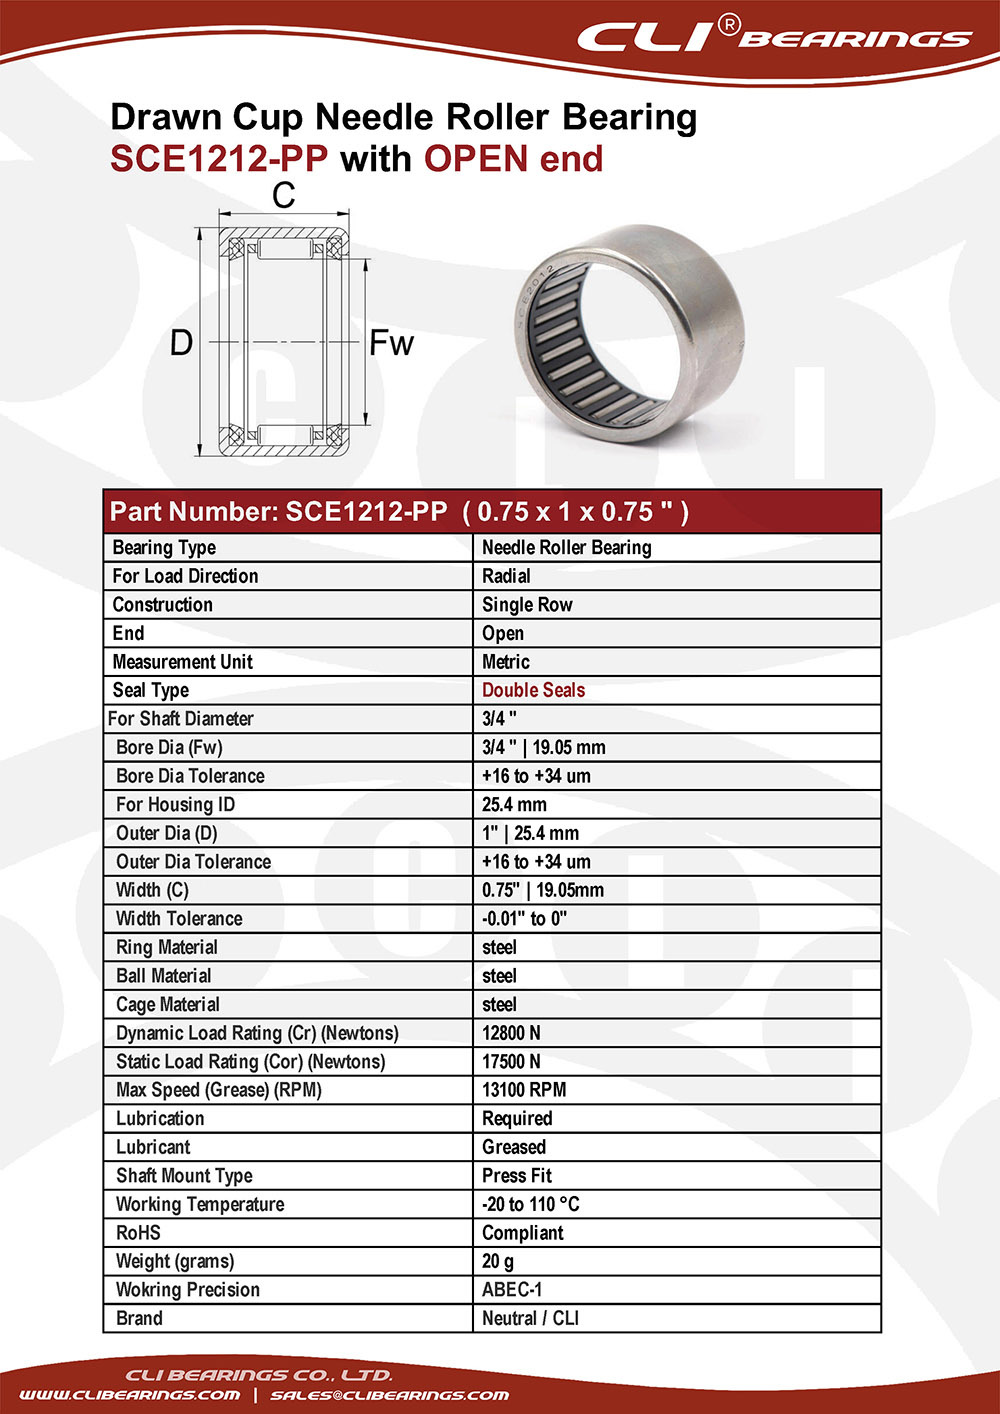 Original sce1212 pp 0 75x1x0 75 drawn cup needle roller bearings with double seals   cli bearings co ltd nw